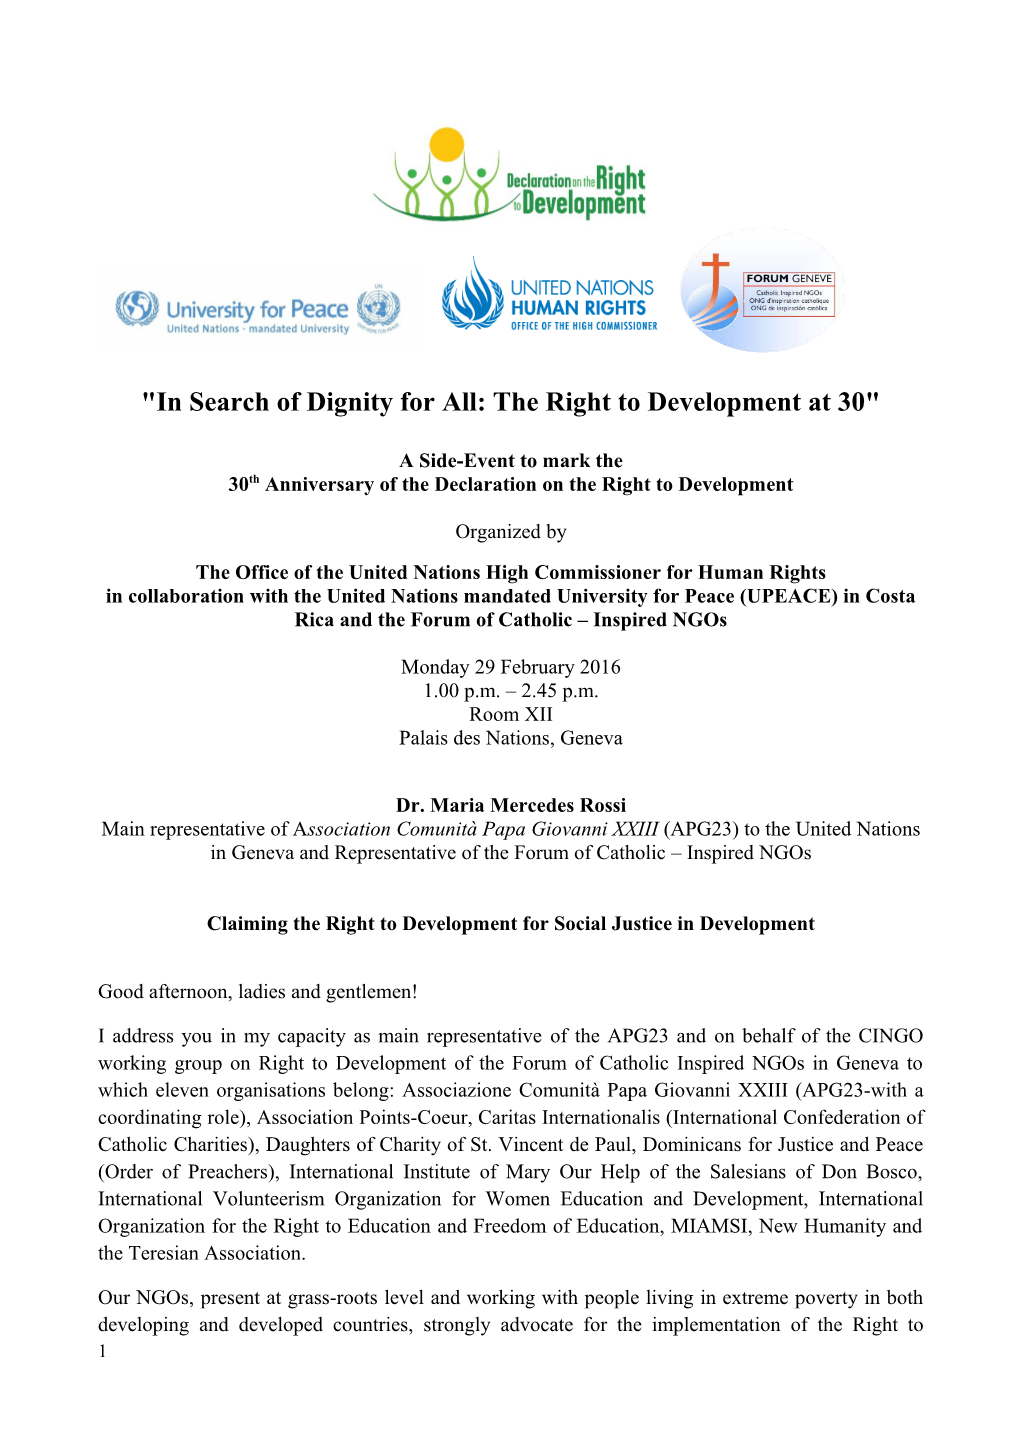 In Search of Dignity for All: the Right to Development at 30